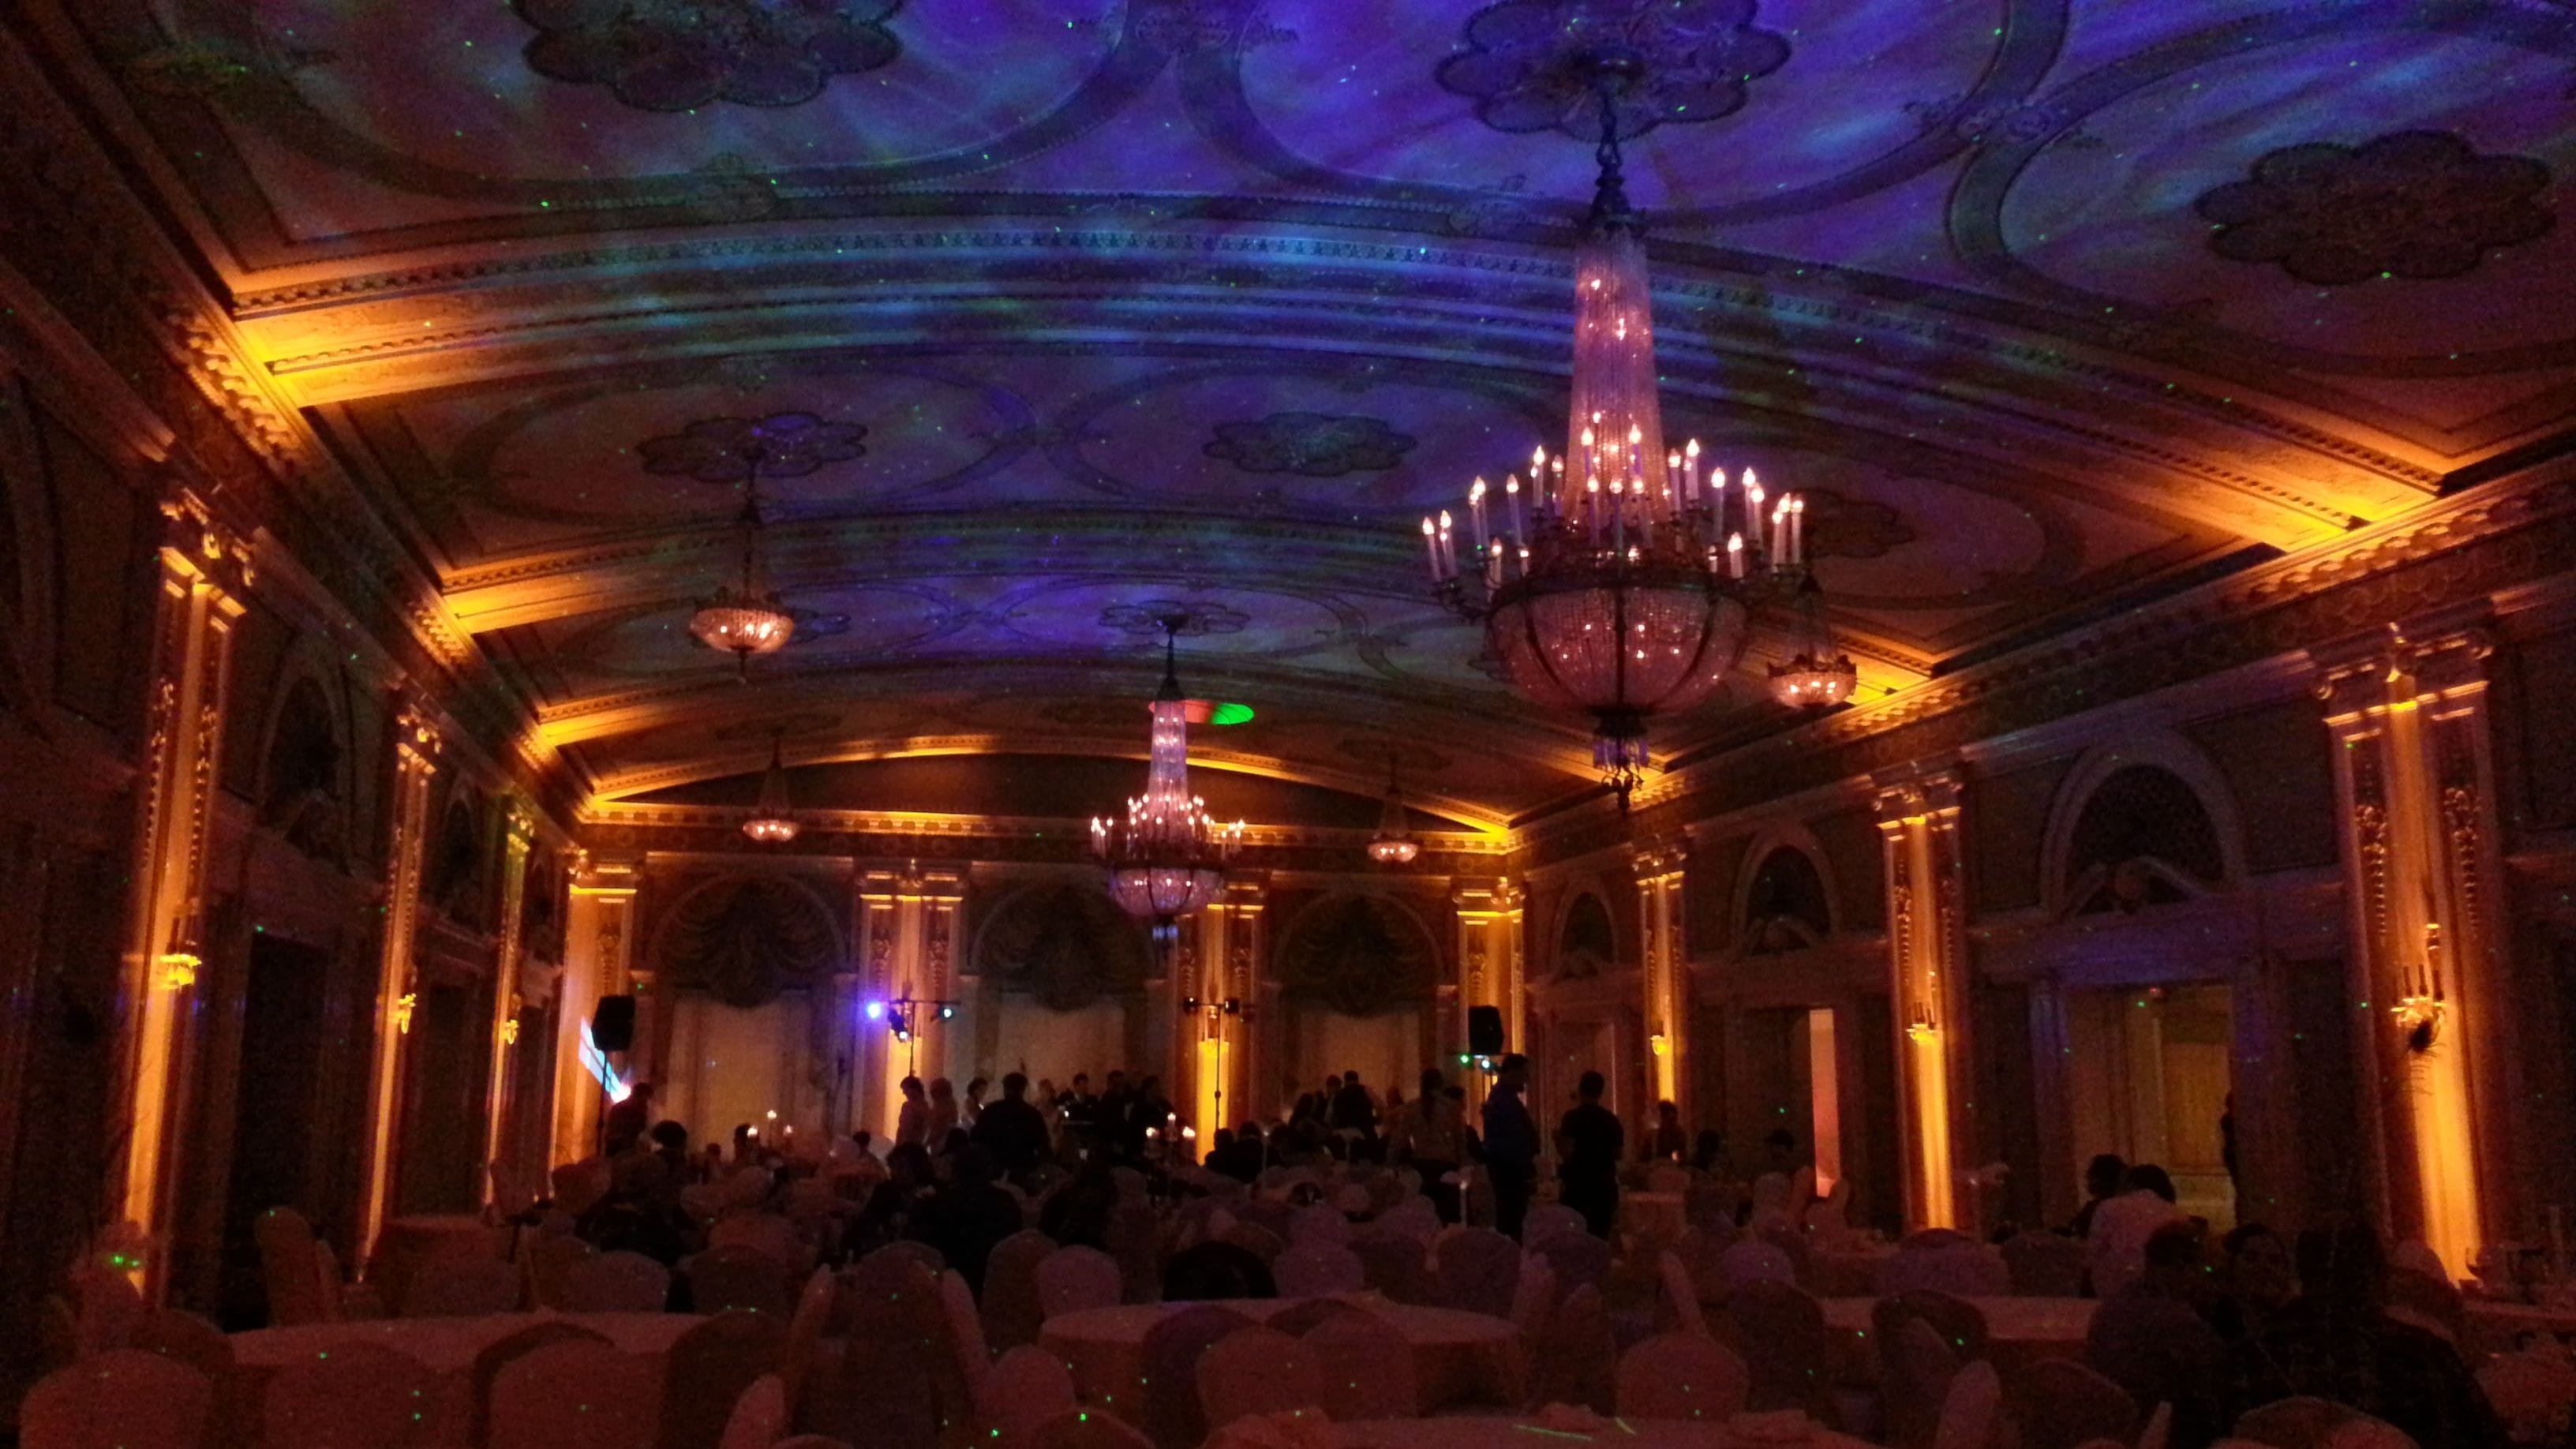 Wedding lighting at Greysolon Ballroom. Up lighting in amber with stars and Northern Lights on the ceiling.